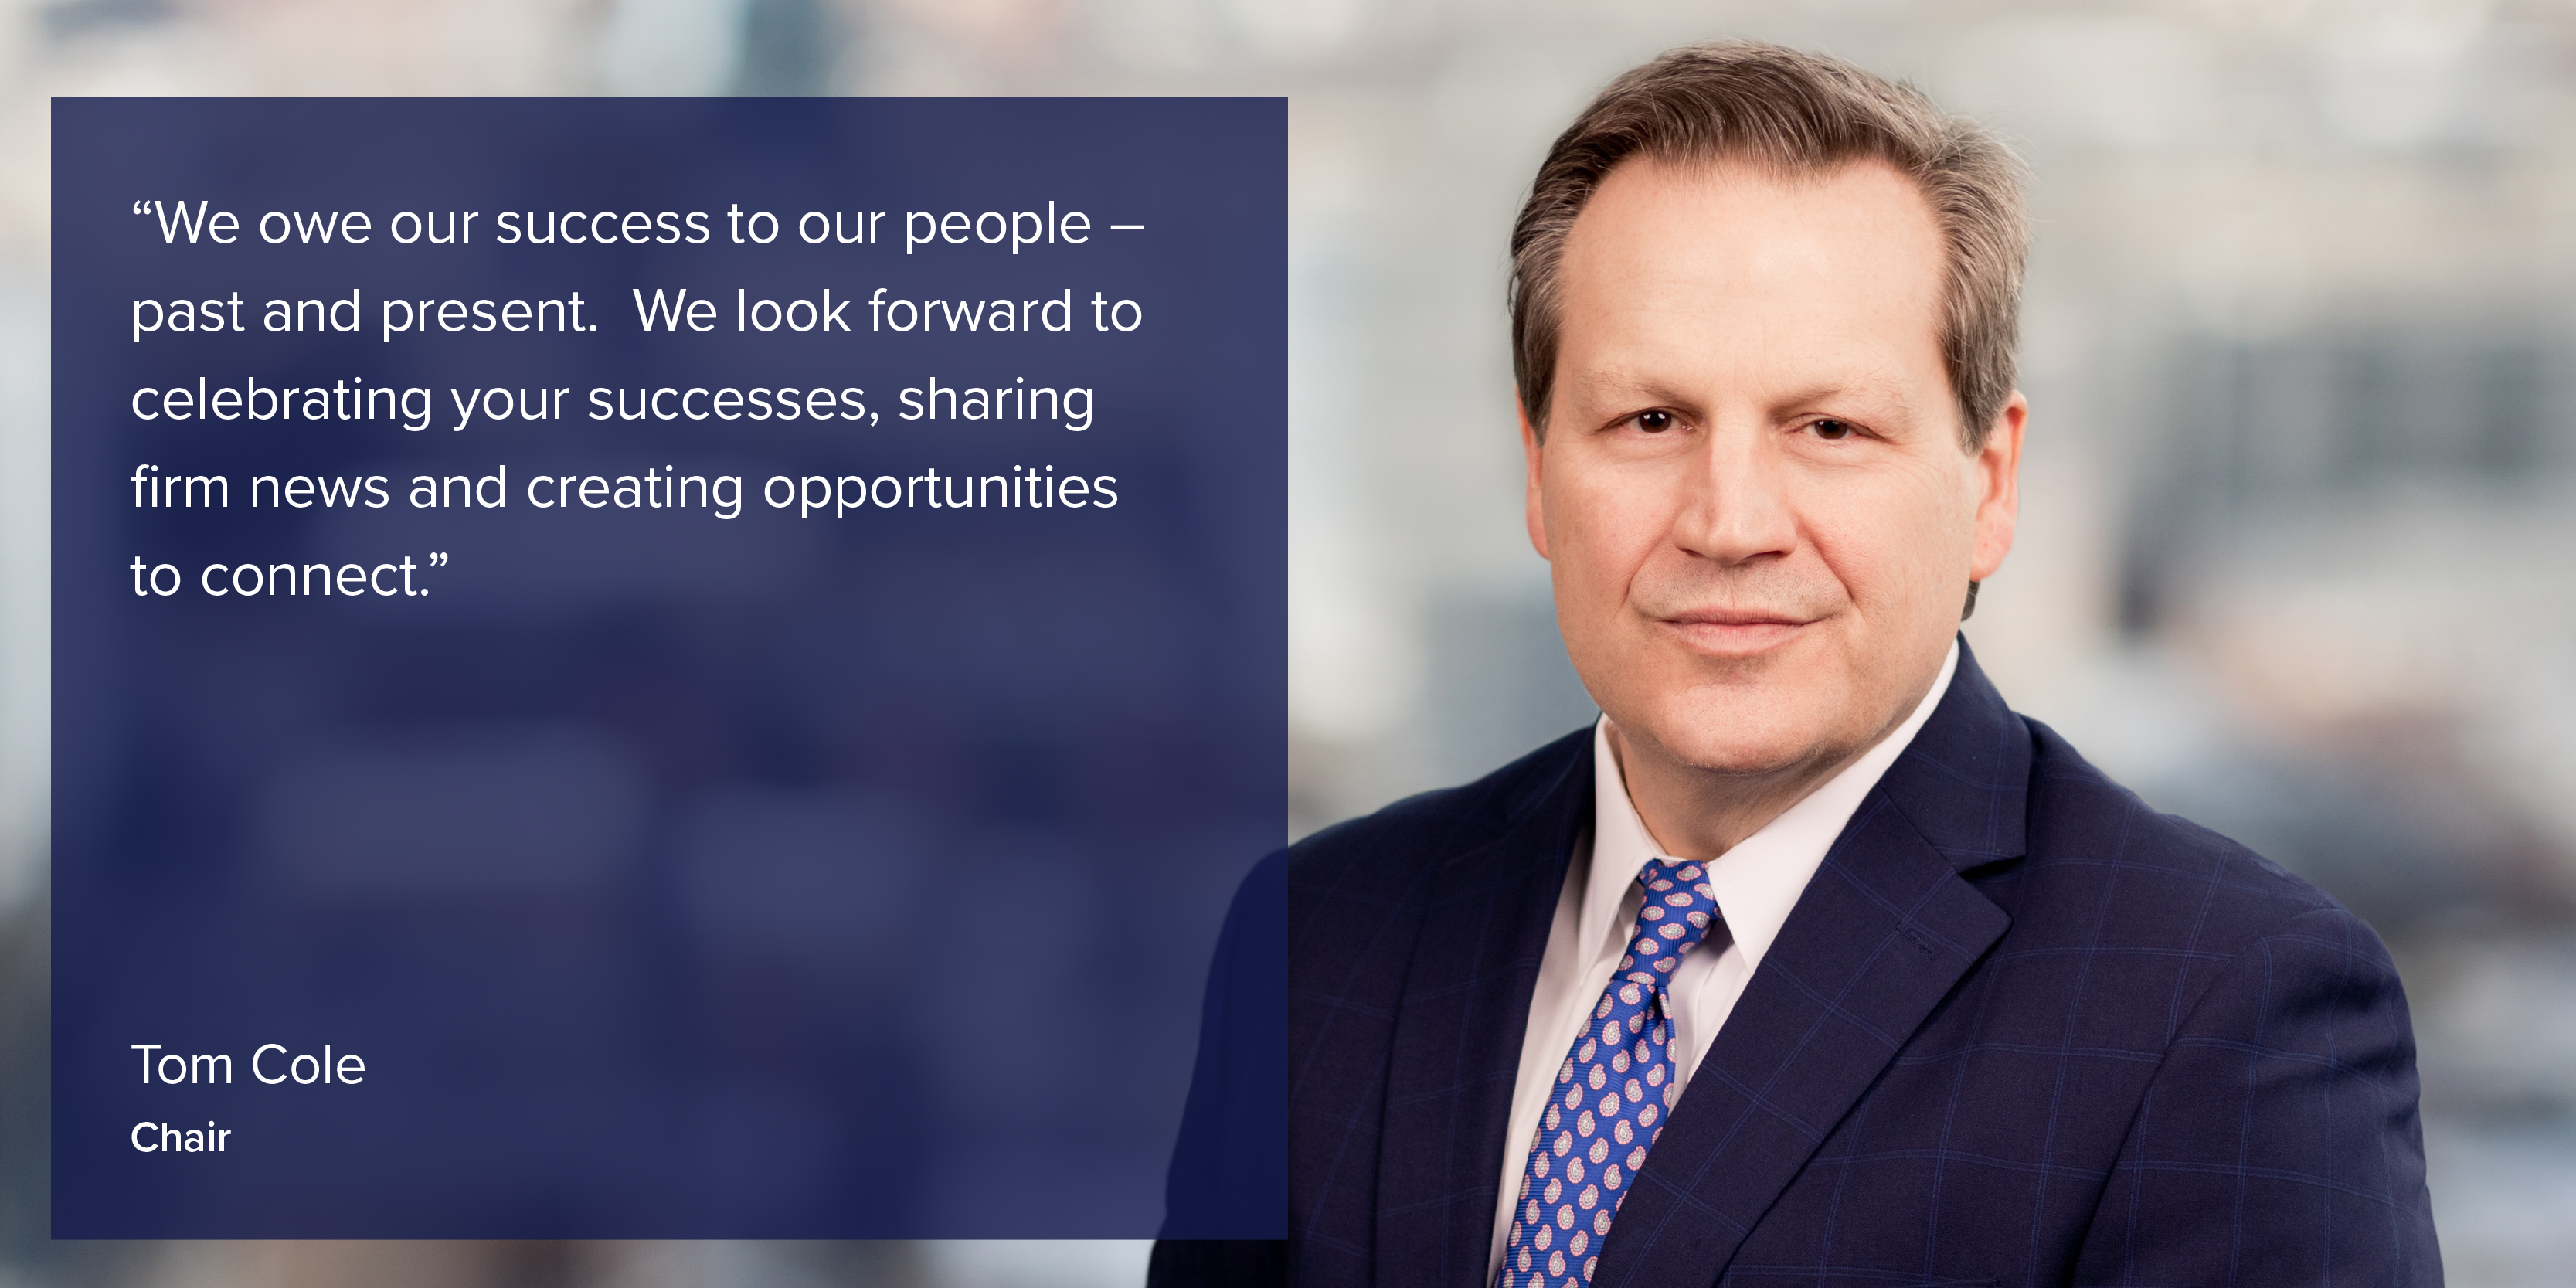 "We owe our success to our people - past and present. We look forward to celebrating your successes, sharing firm news and creating opportunities to connect." Tom Cole, Chair